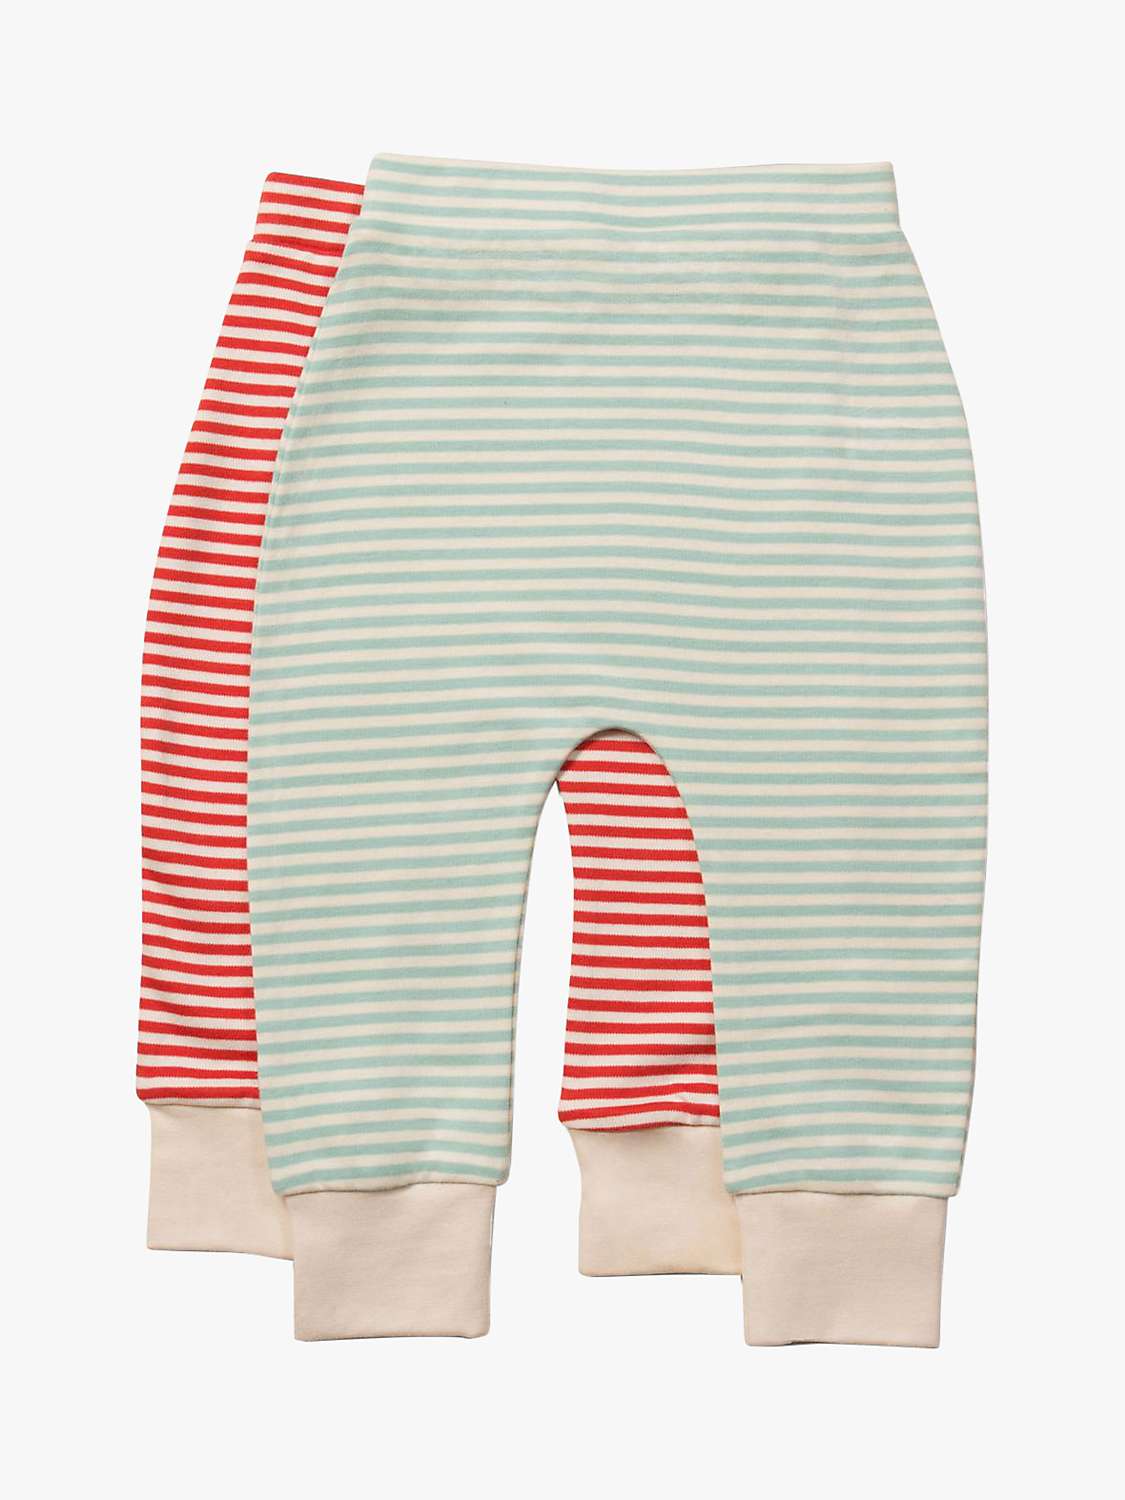 Buy Little Green Radicals Baby Organic Striped Wriggle Bottom Trousers, Pack of 2 Online at johnlewis.com